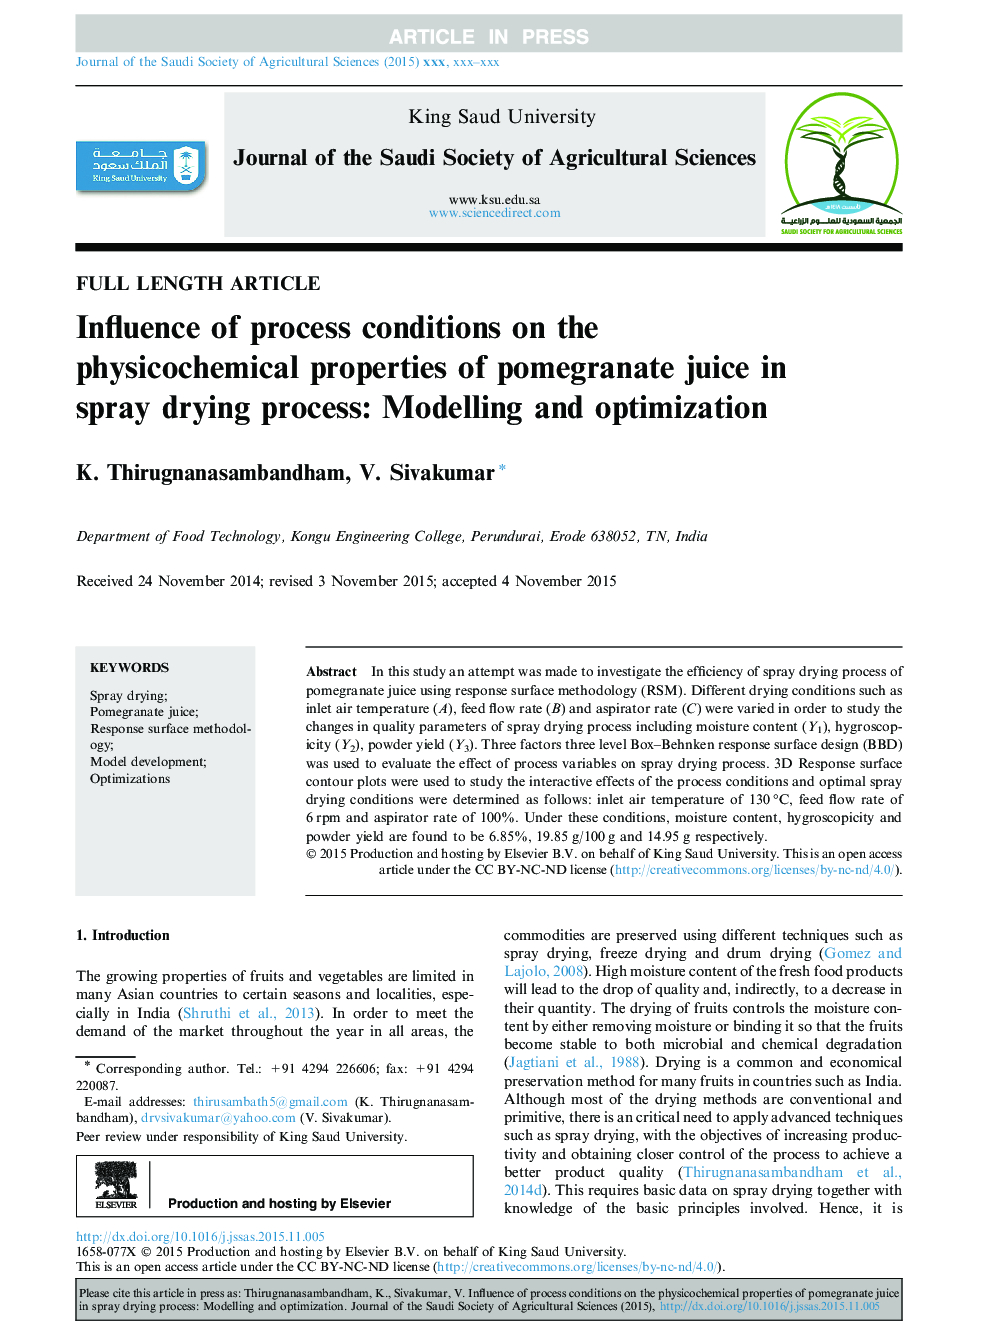 Influence of process conditions on the physicochemical properties of pomegranate juice in spray drying process: Modelling and optimization